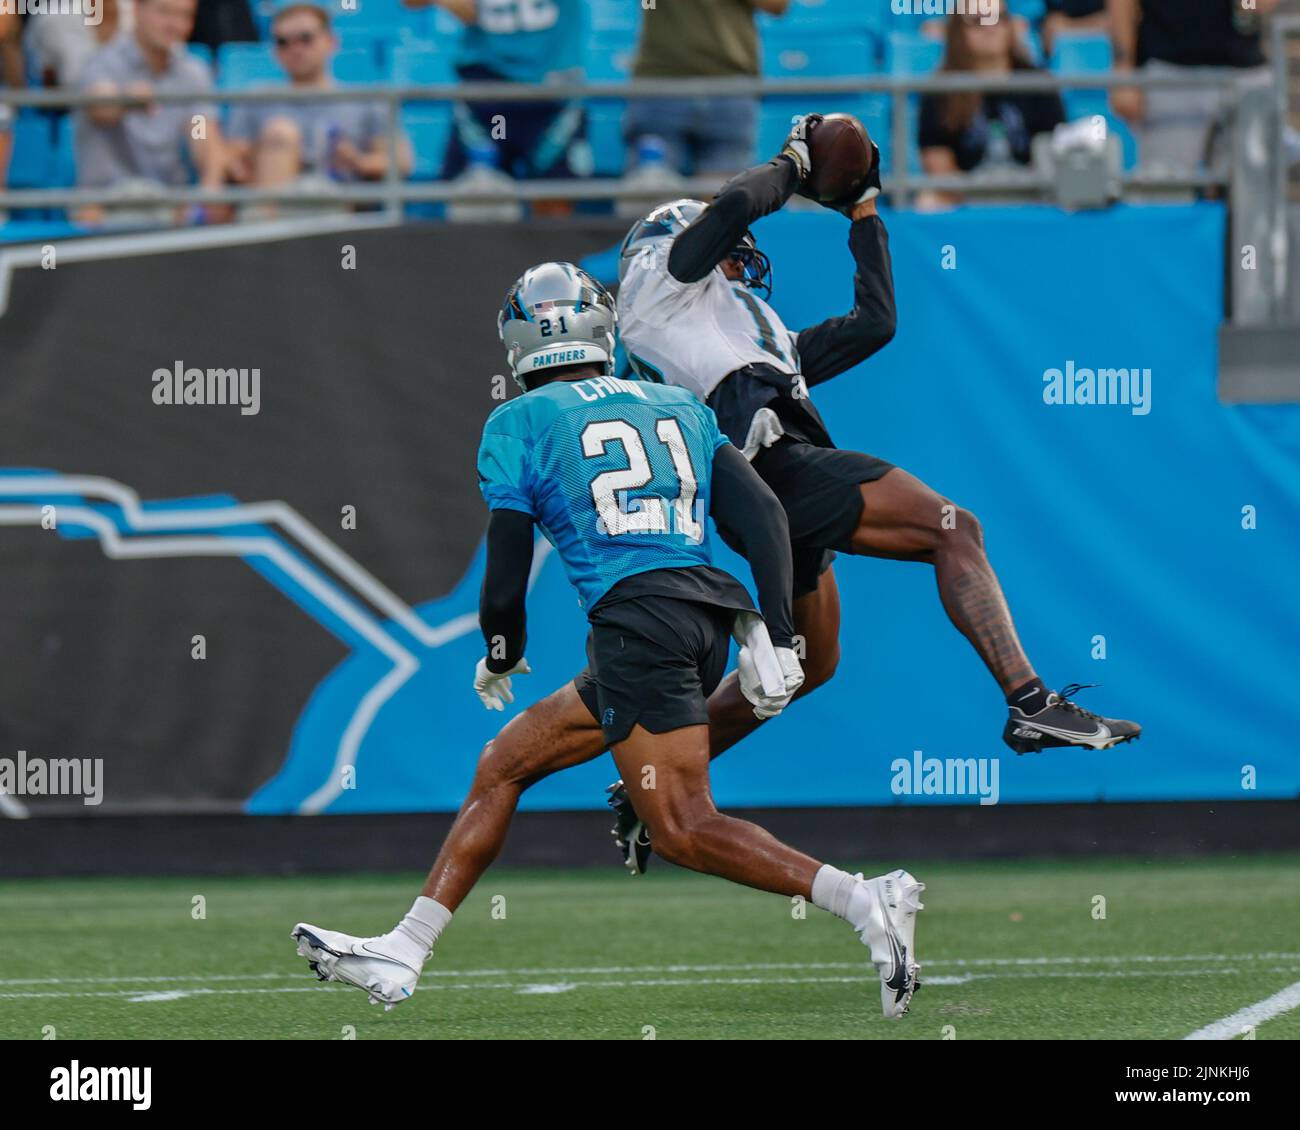 Charlotte, United States. 11th Aug, 2022. Charlotte, NC, USA: Carolina Panthers wide receiver Shi Smith (12) makes a reception while covered by safety Jeremy Chinn (21) during Fan Fest at Bank of America Stadium, Thursday, Aug. 11, 2022, in Charlotte, NC. (Brian Villanueva/Image of Sport) Photo via Credit: Newscom/Alamy Live News Stock Photo